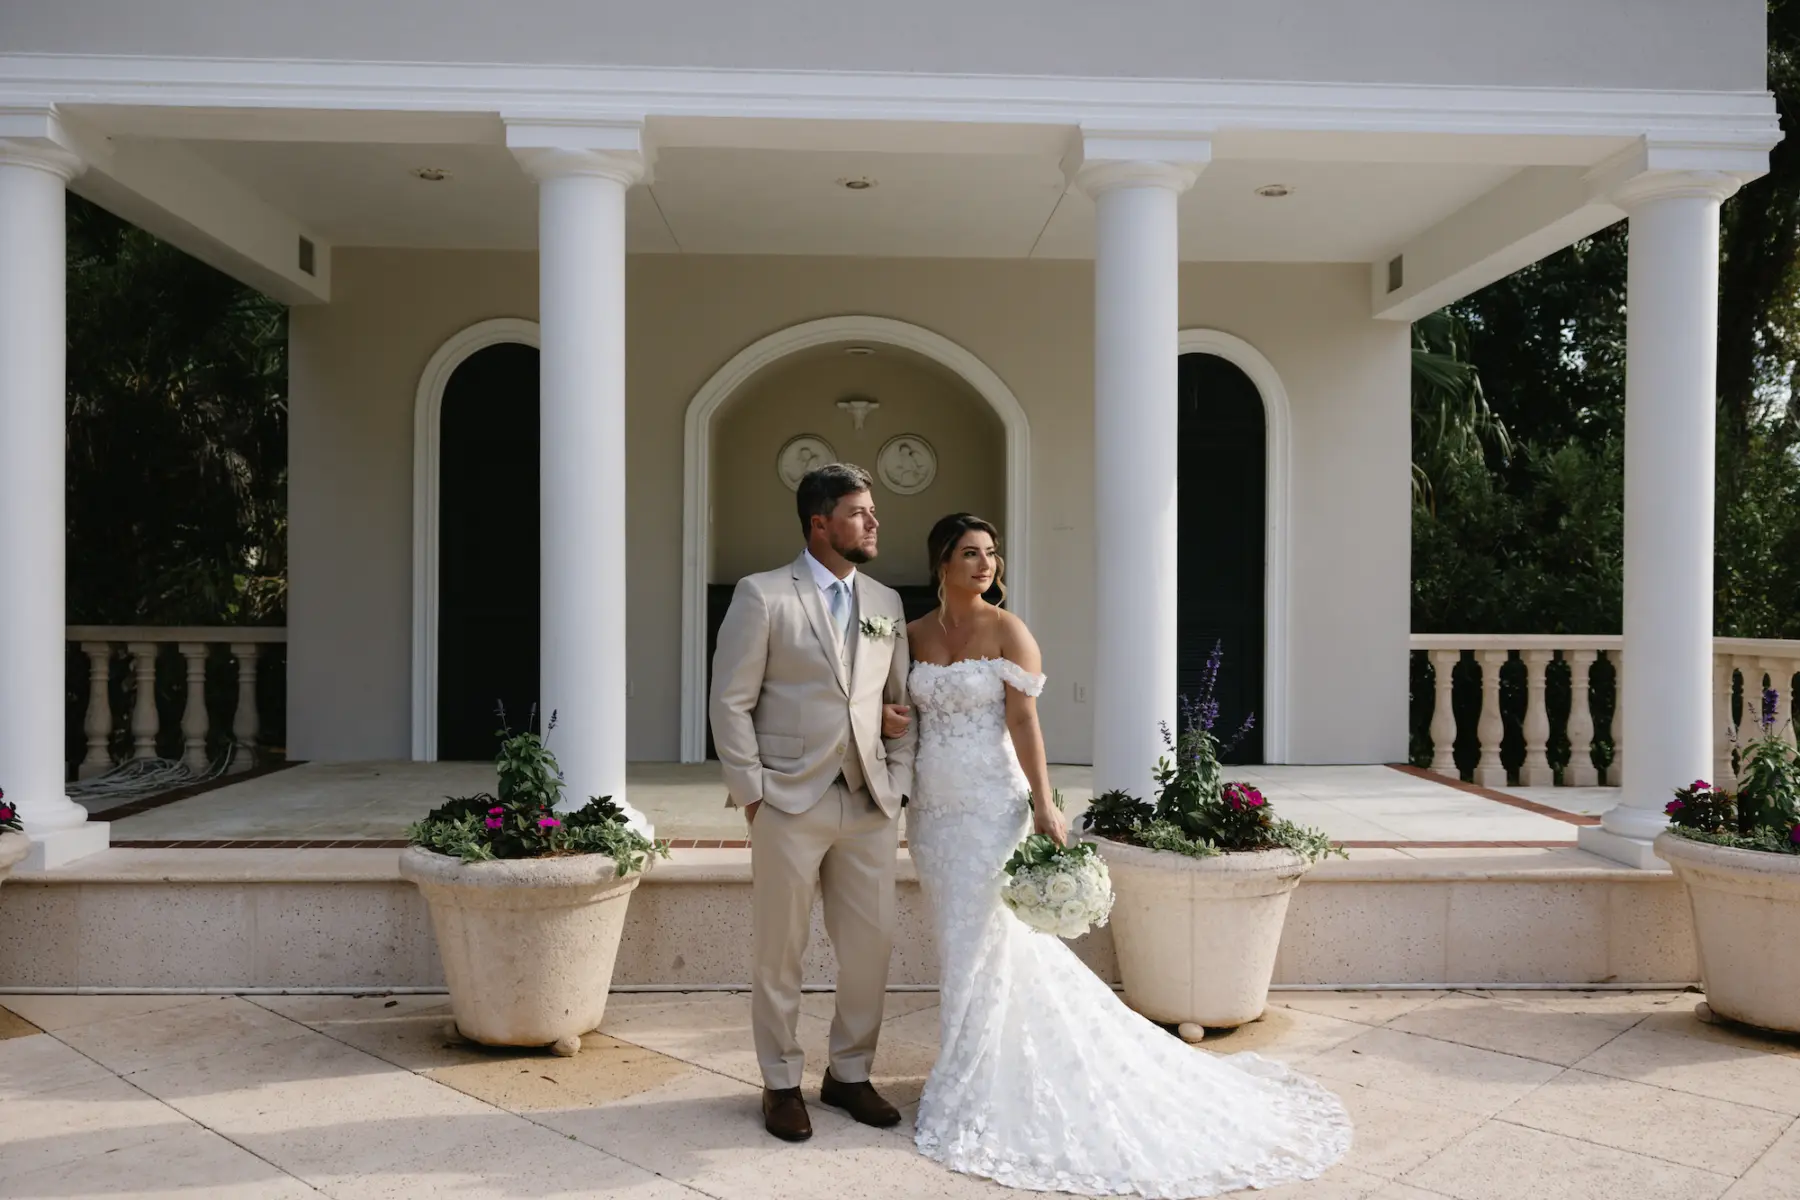 Bride and Groom First Look Wedding Portrait | Tampa Bay Photographer Arianna J Photography